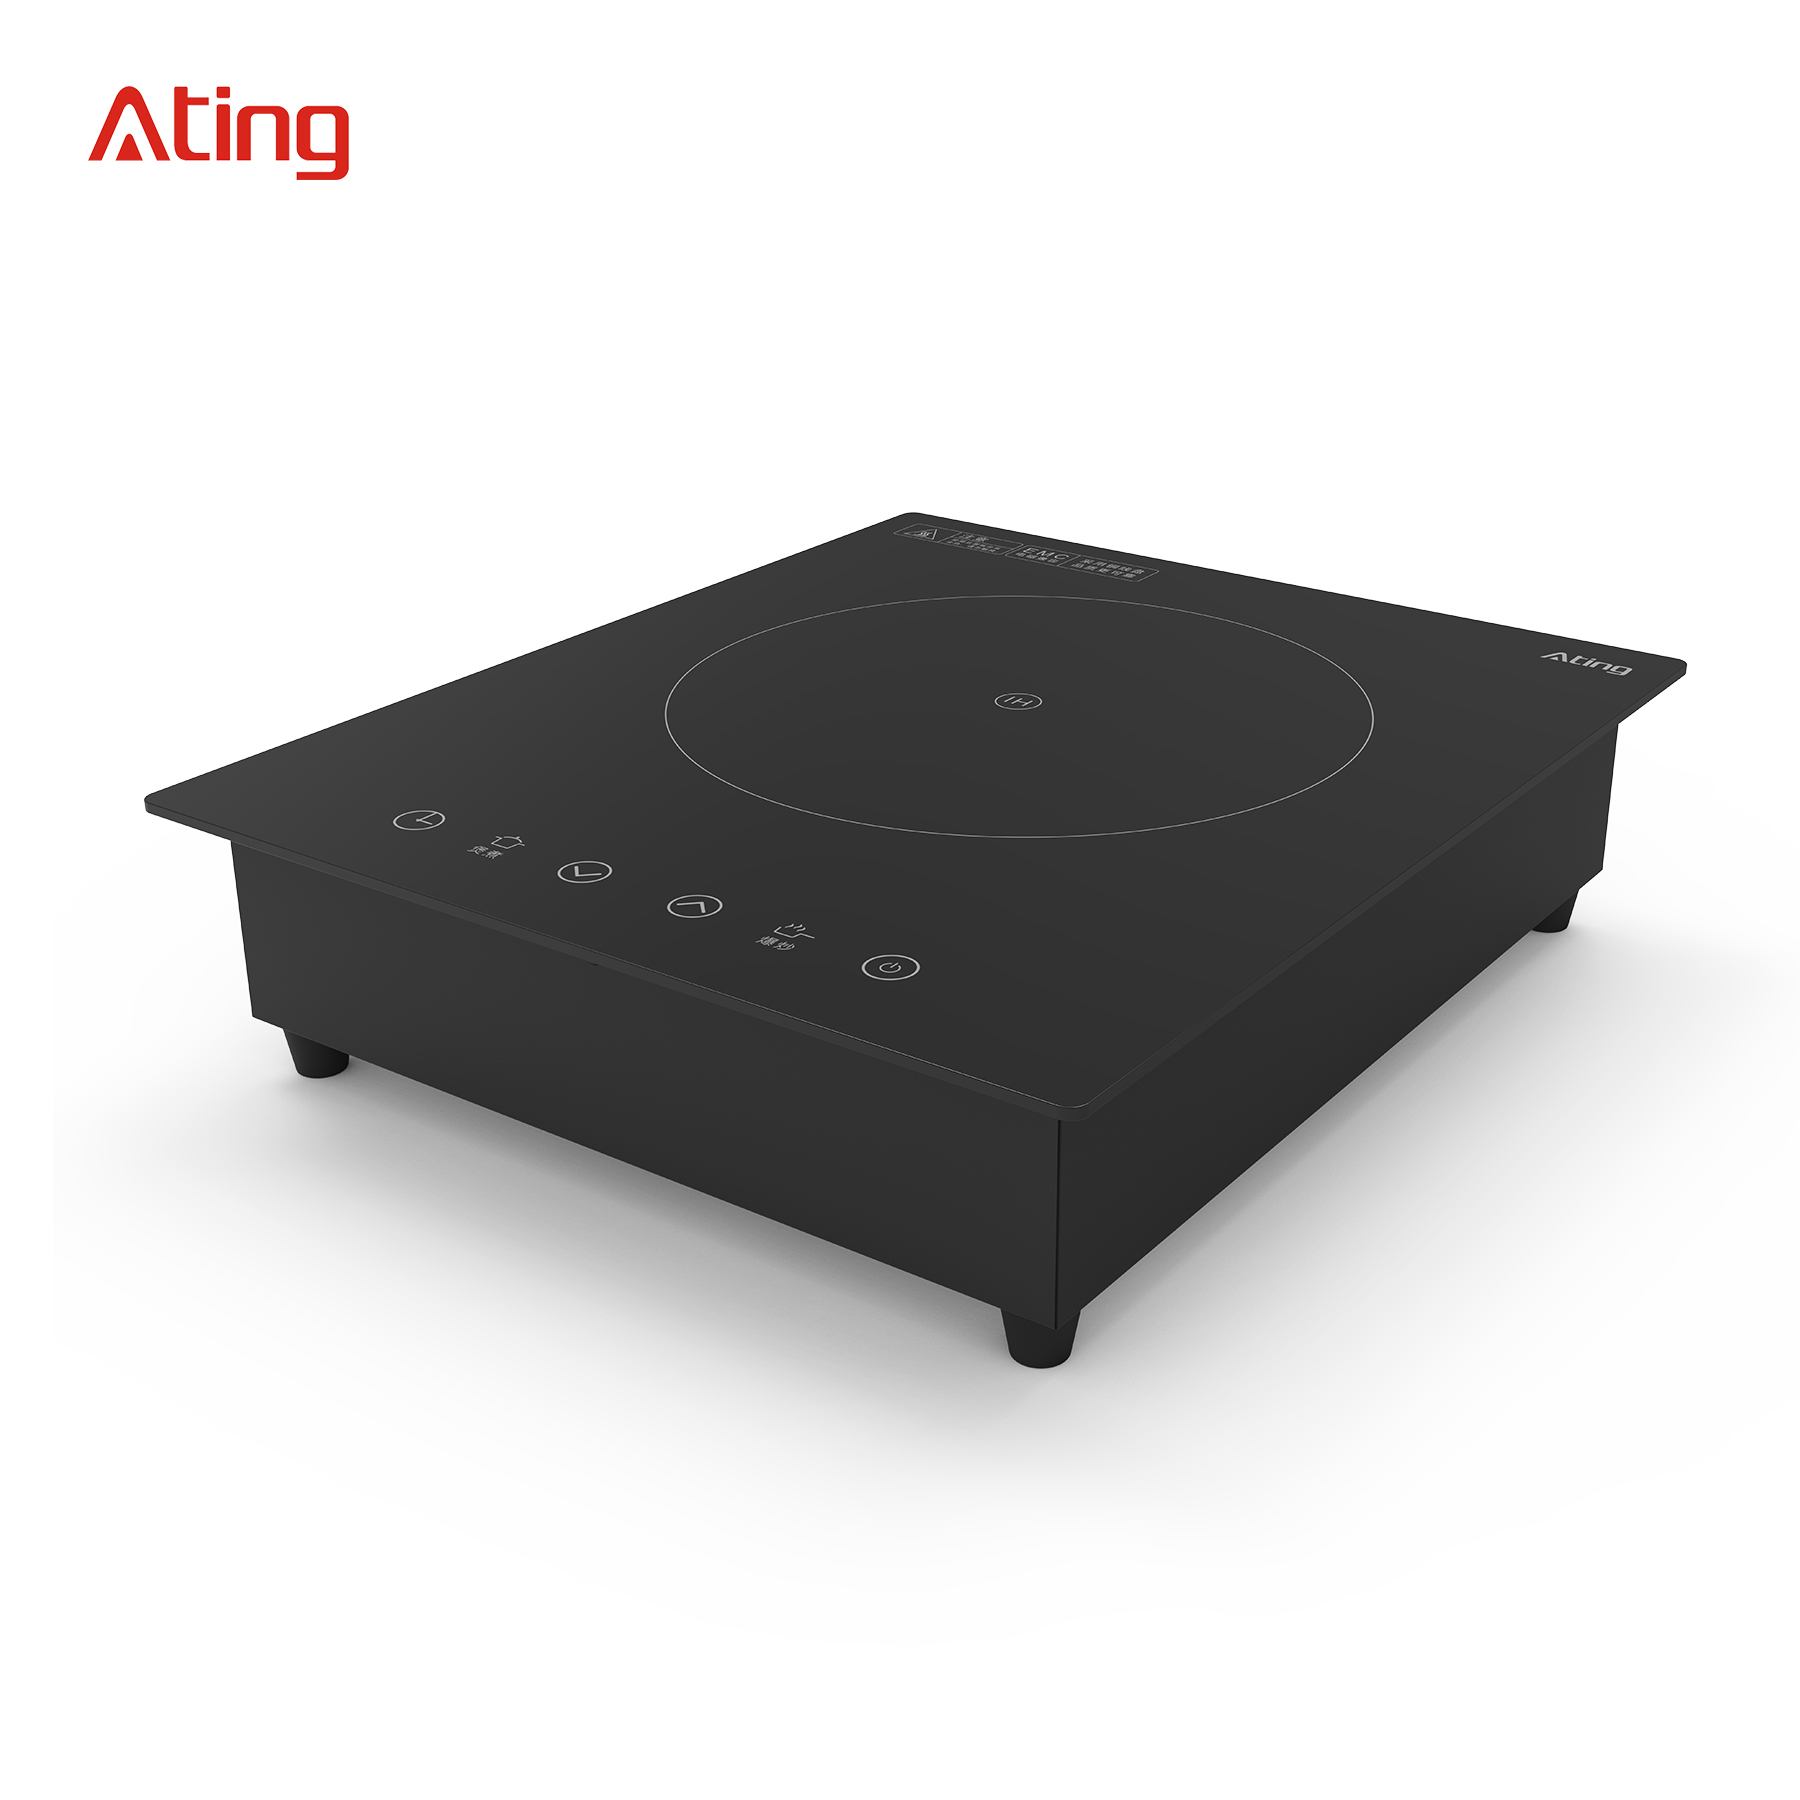 AT-35P, 3500W big power commercial induction cooker/induction hob